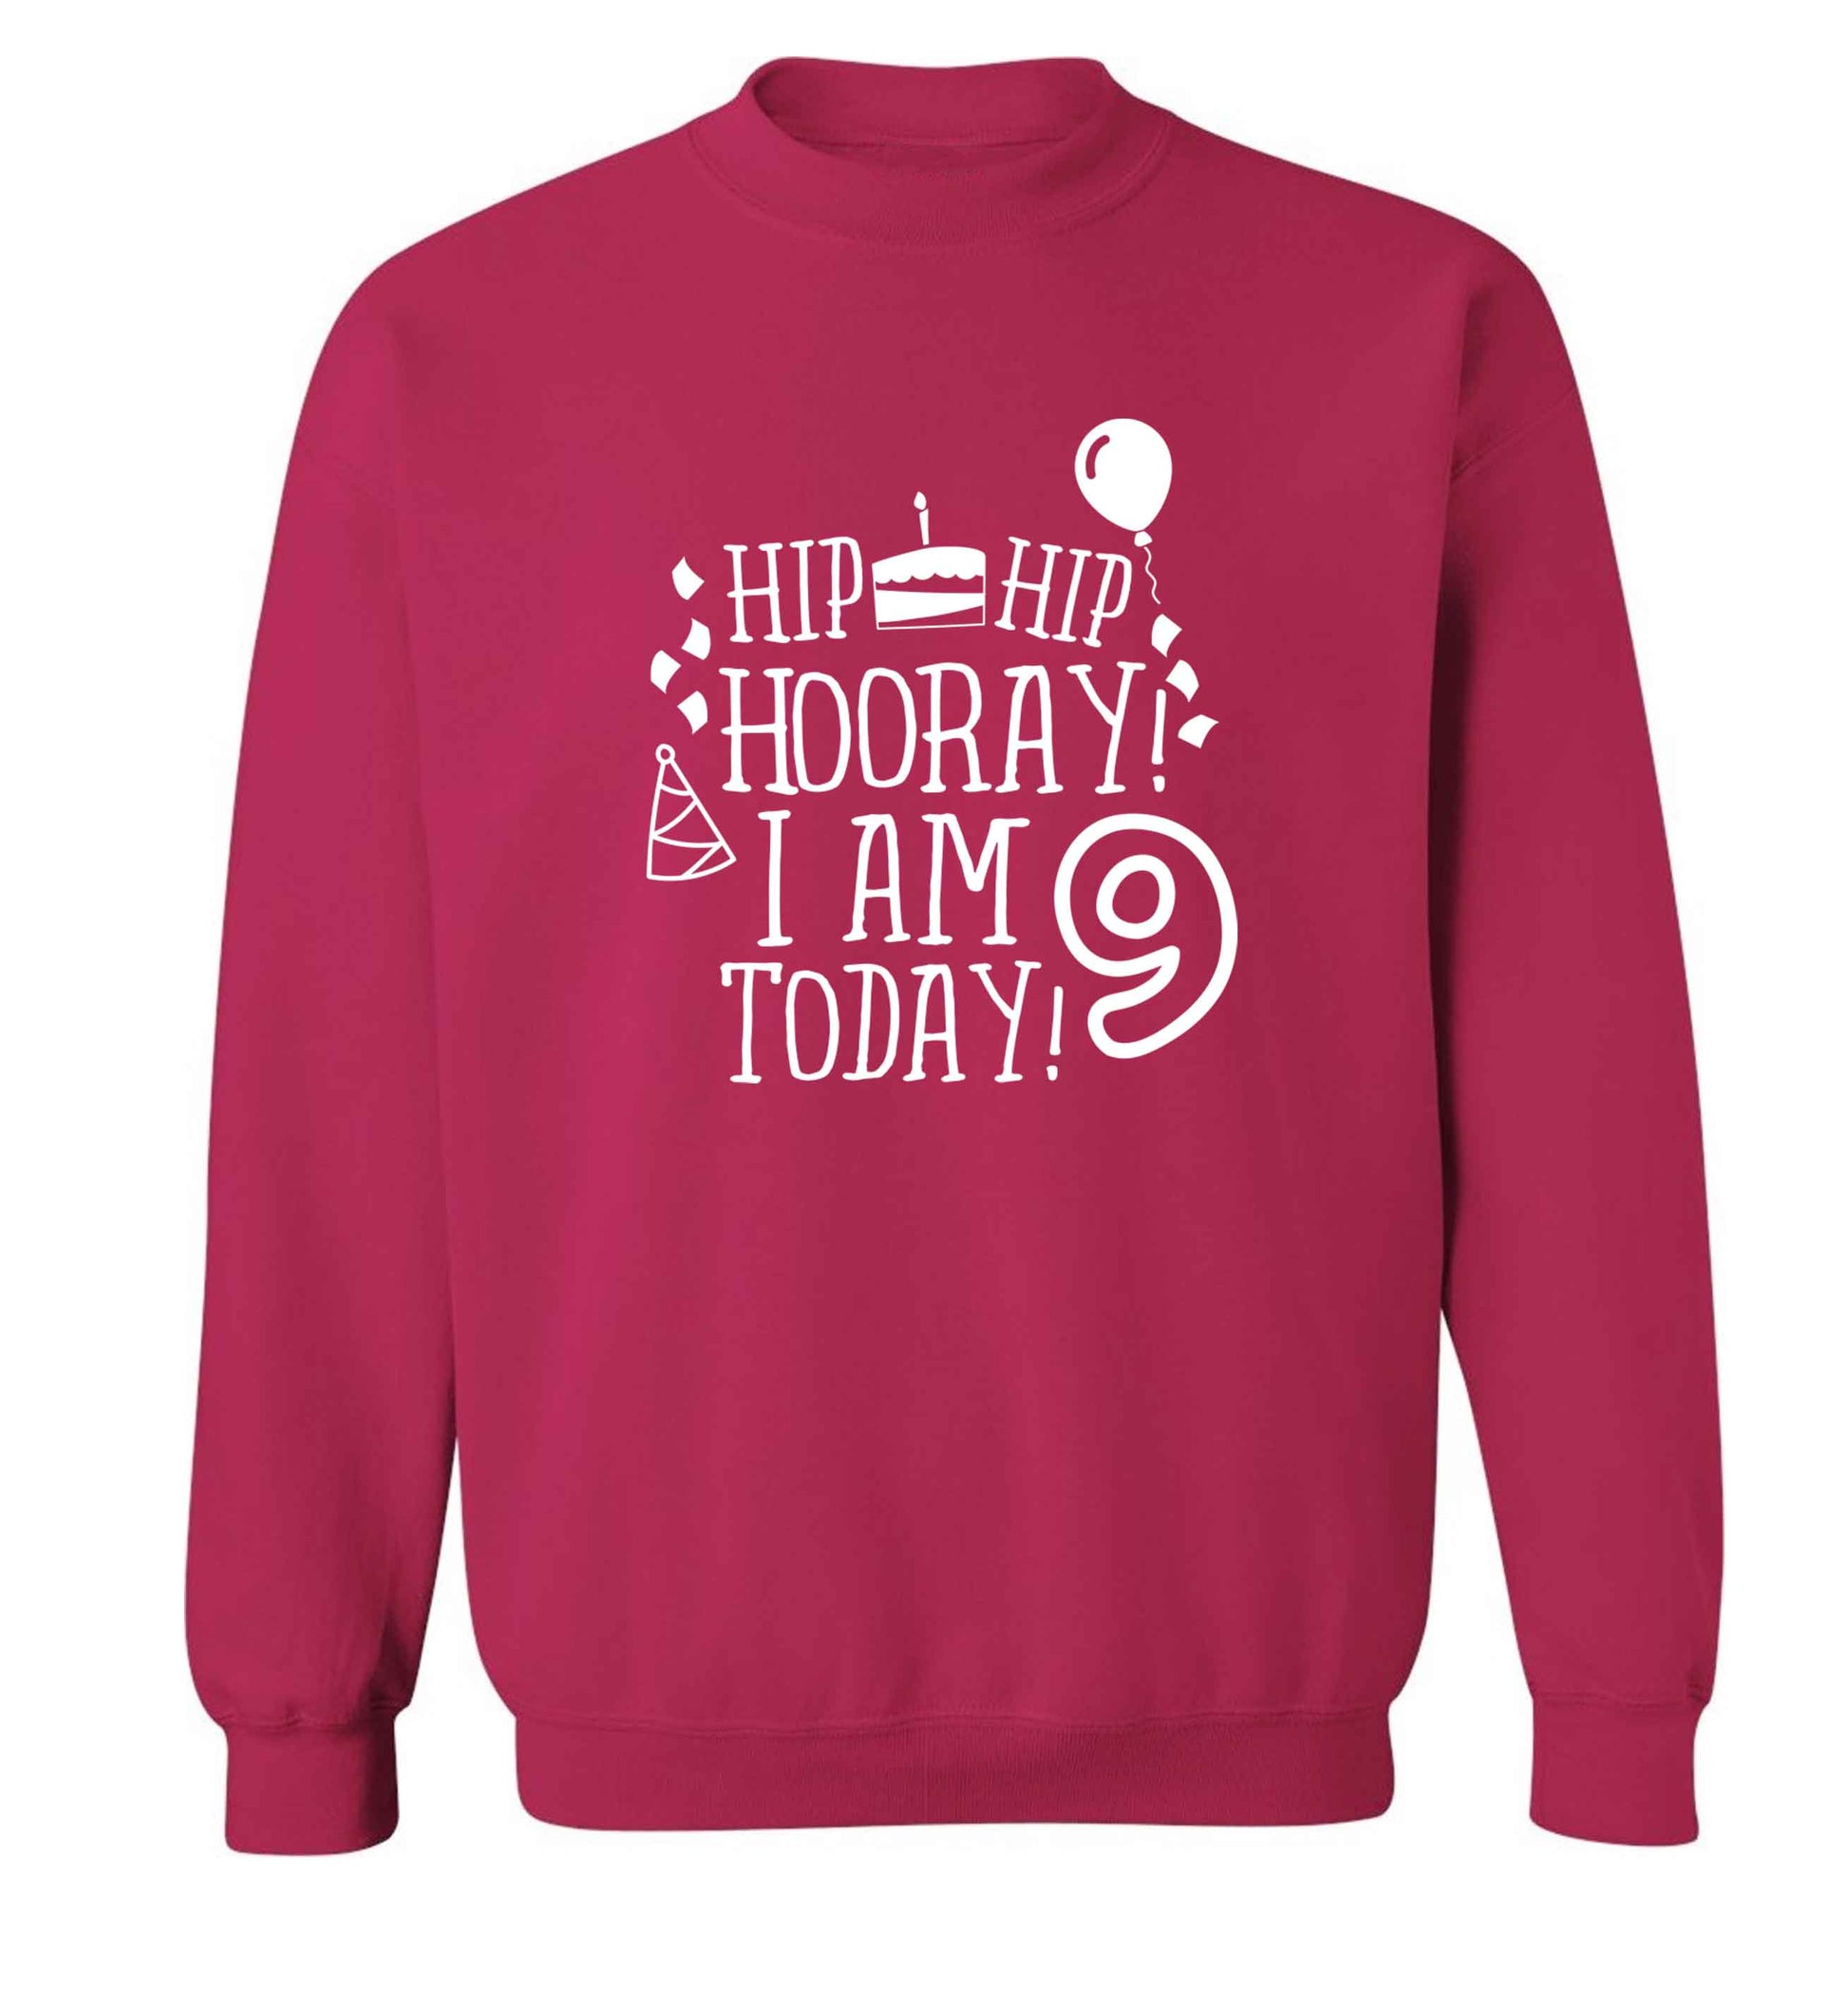 Hip hip hooray I am 9 today! adult's unisex pink sweater 2XL